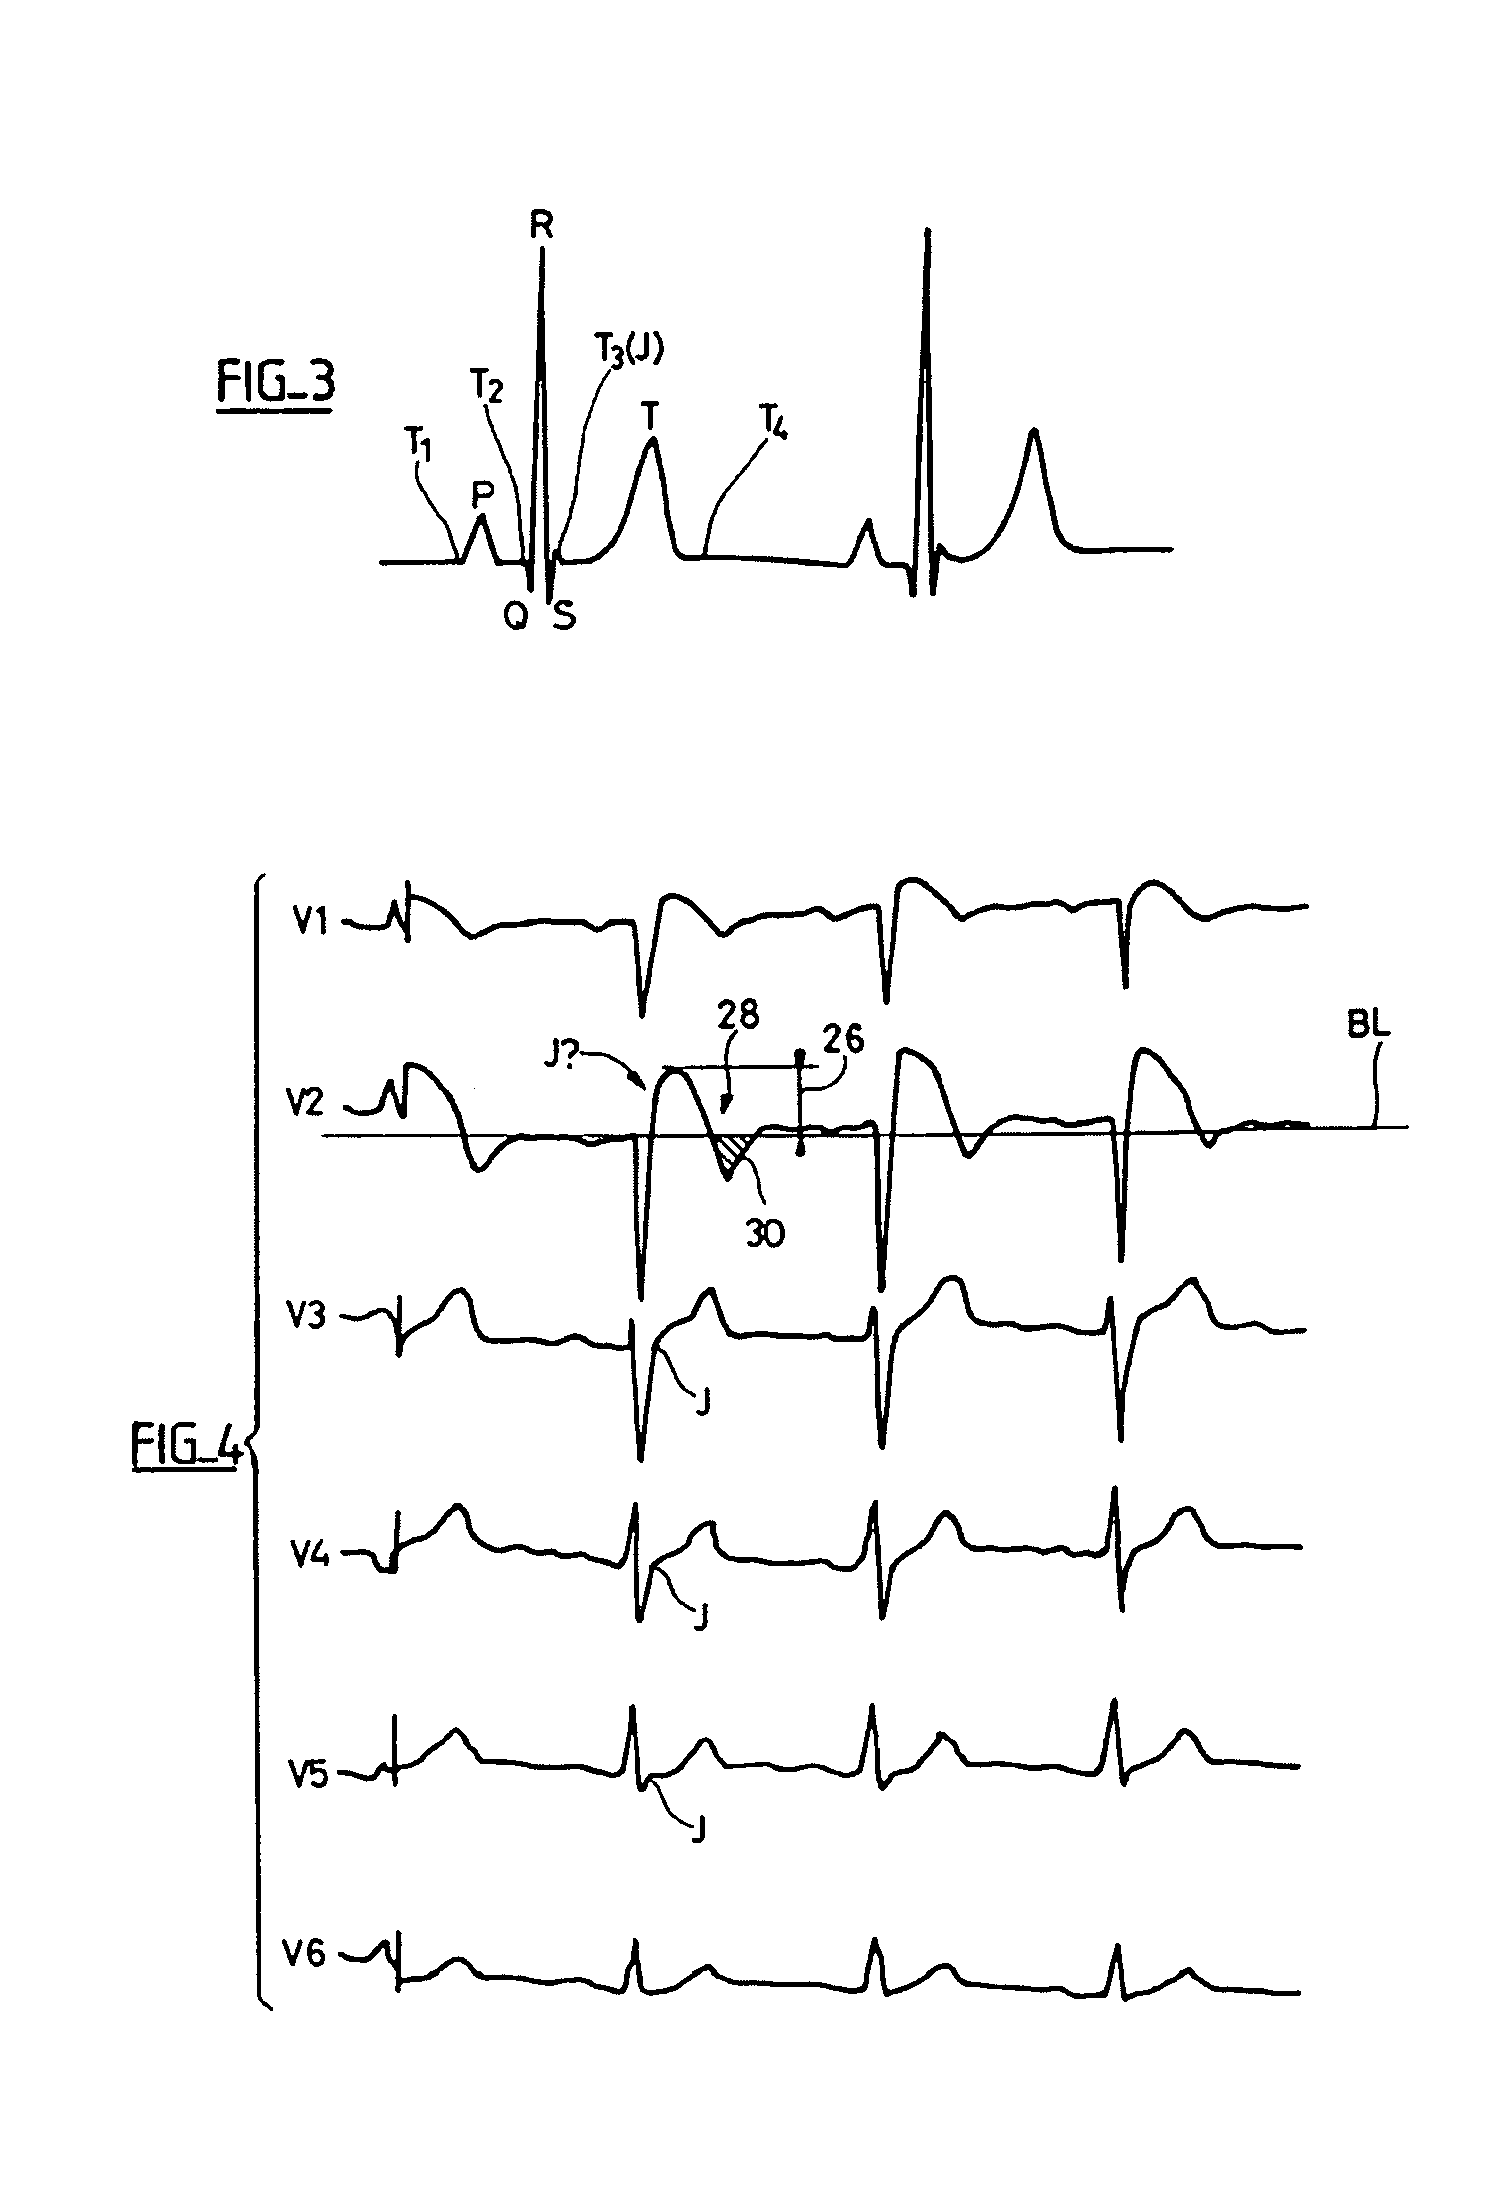 Electrocardiologic device for the assisted diagnosis of brugada syndrome or early repolarization syndrome